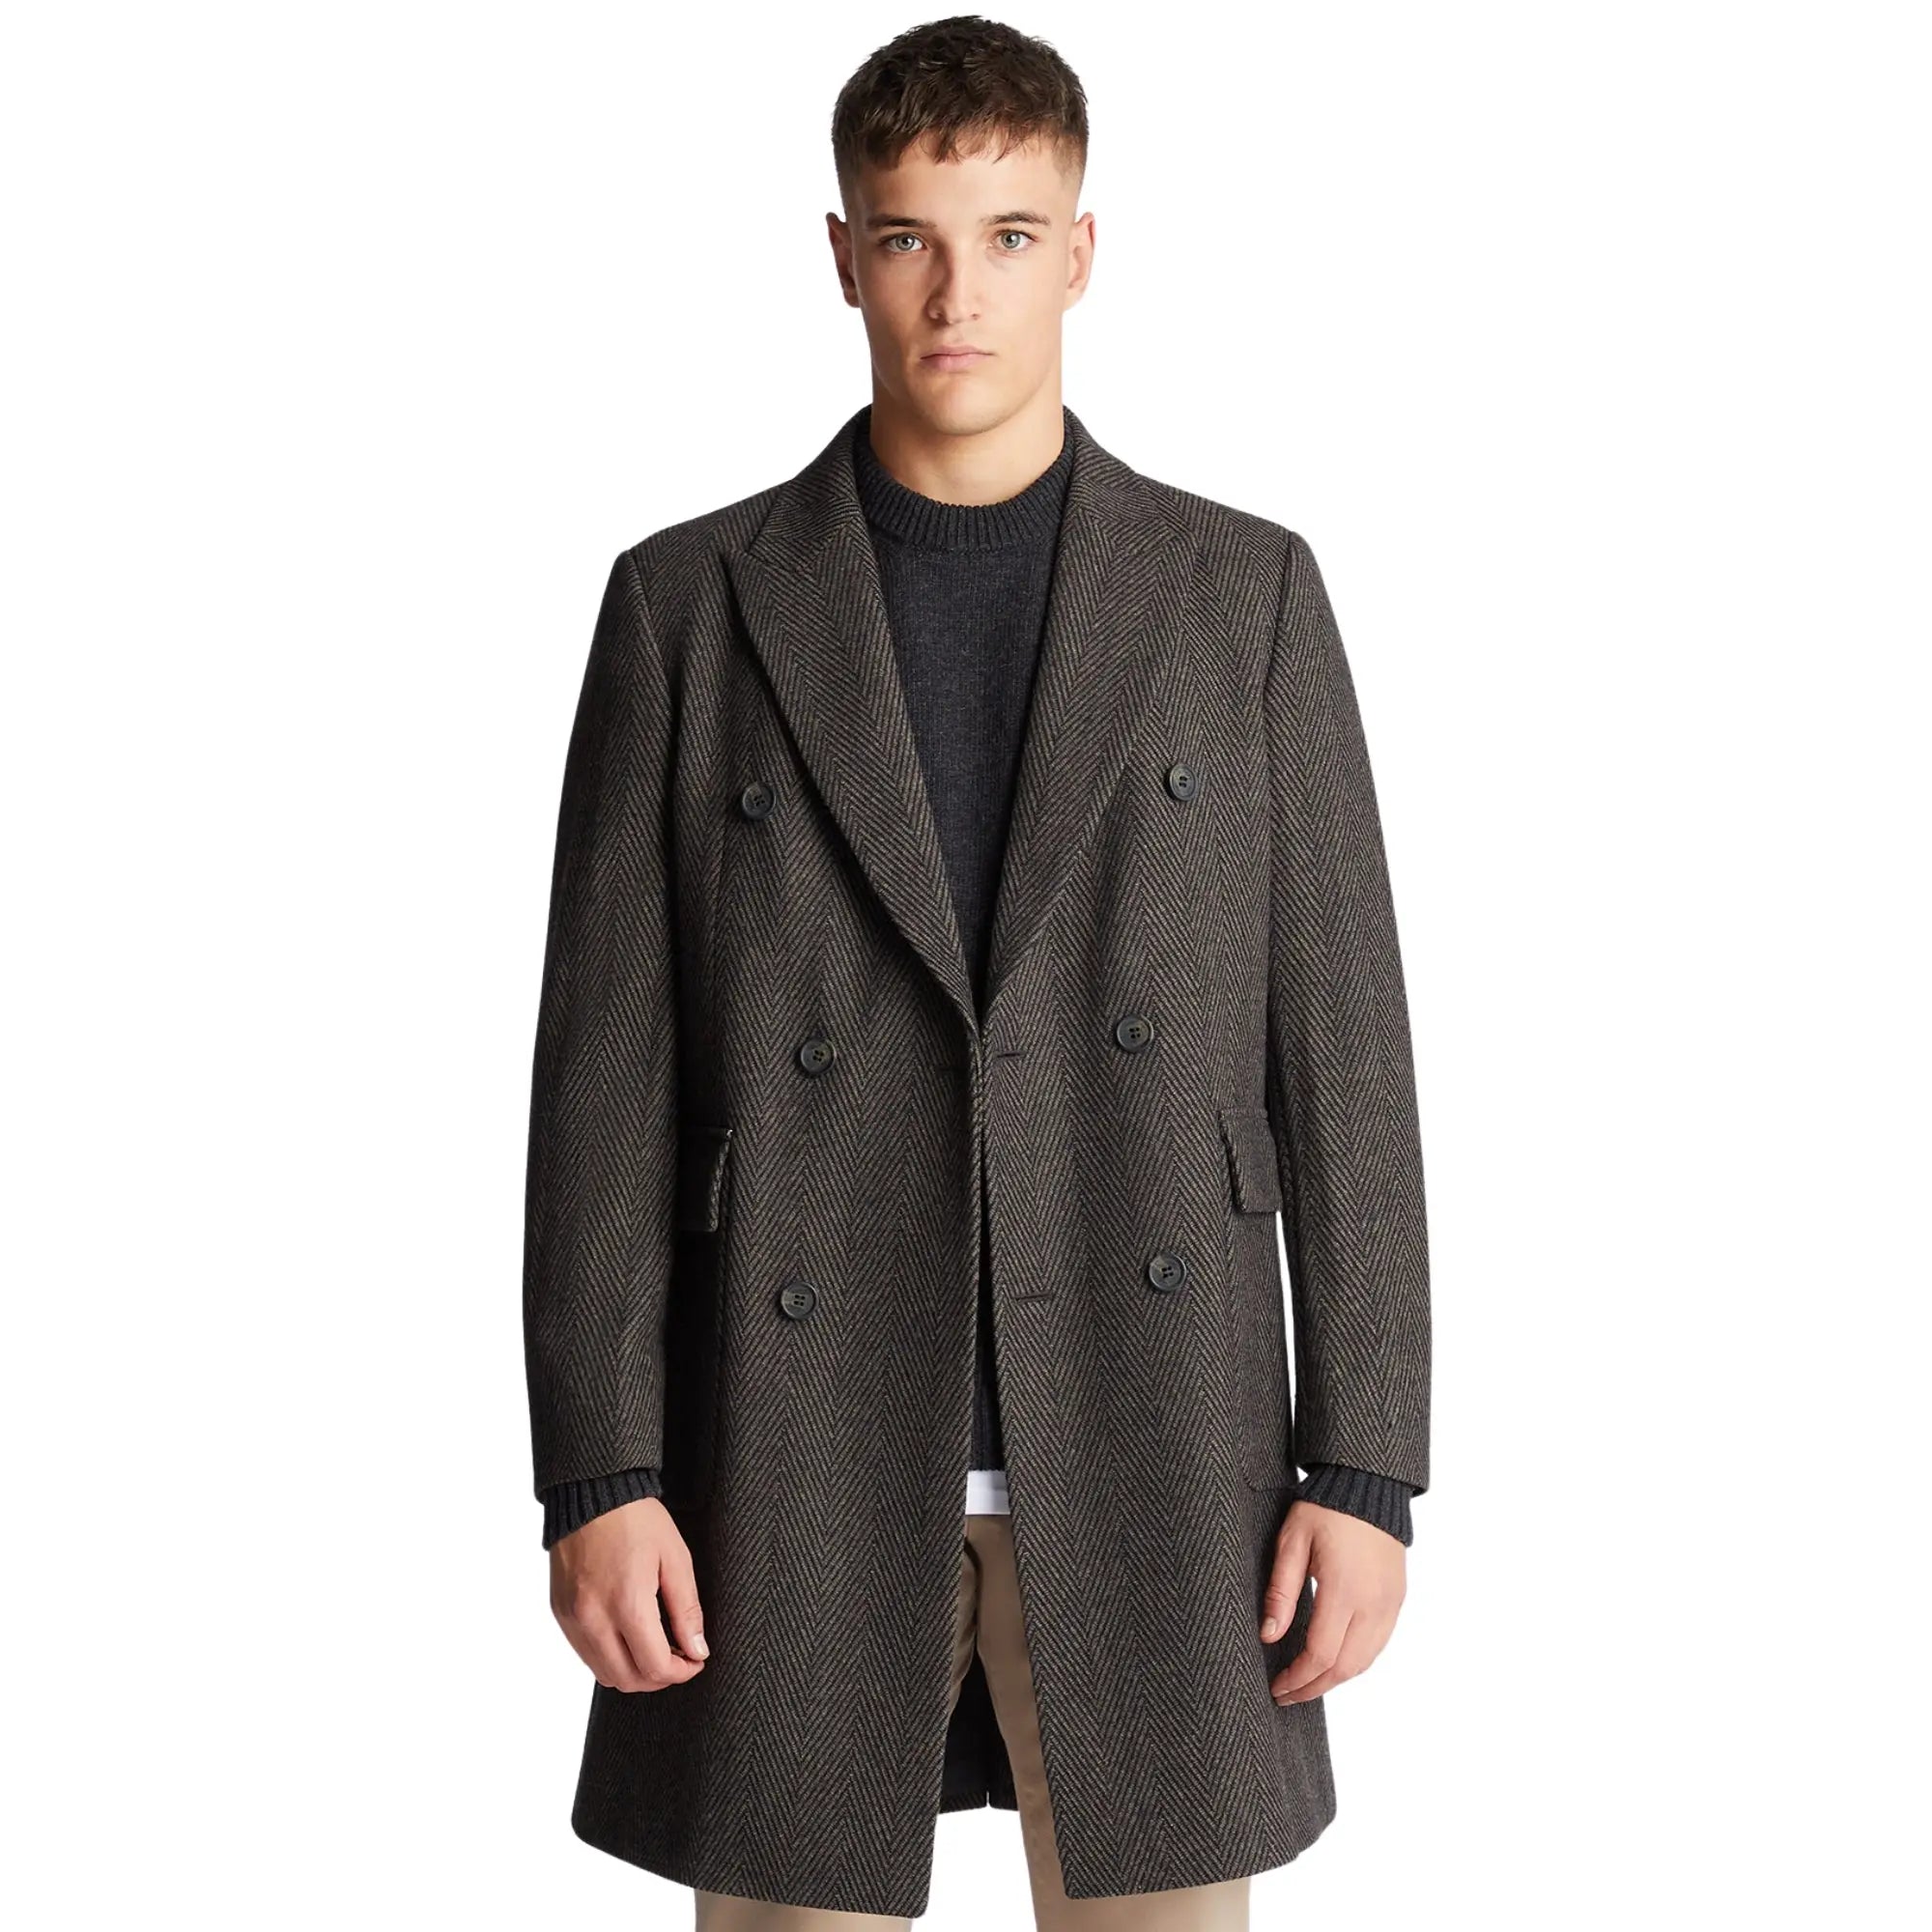 Remus Uomo Brady Double Breasted Overcoat - Brown